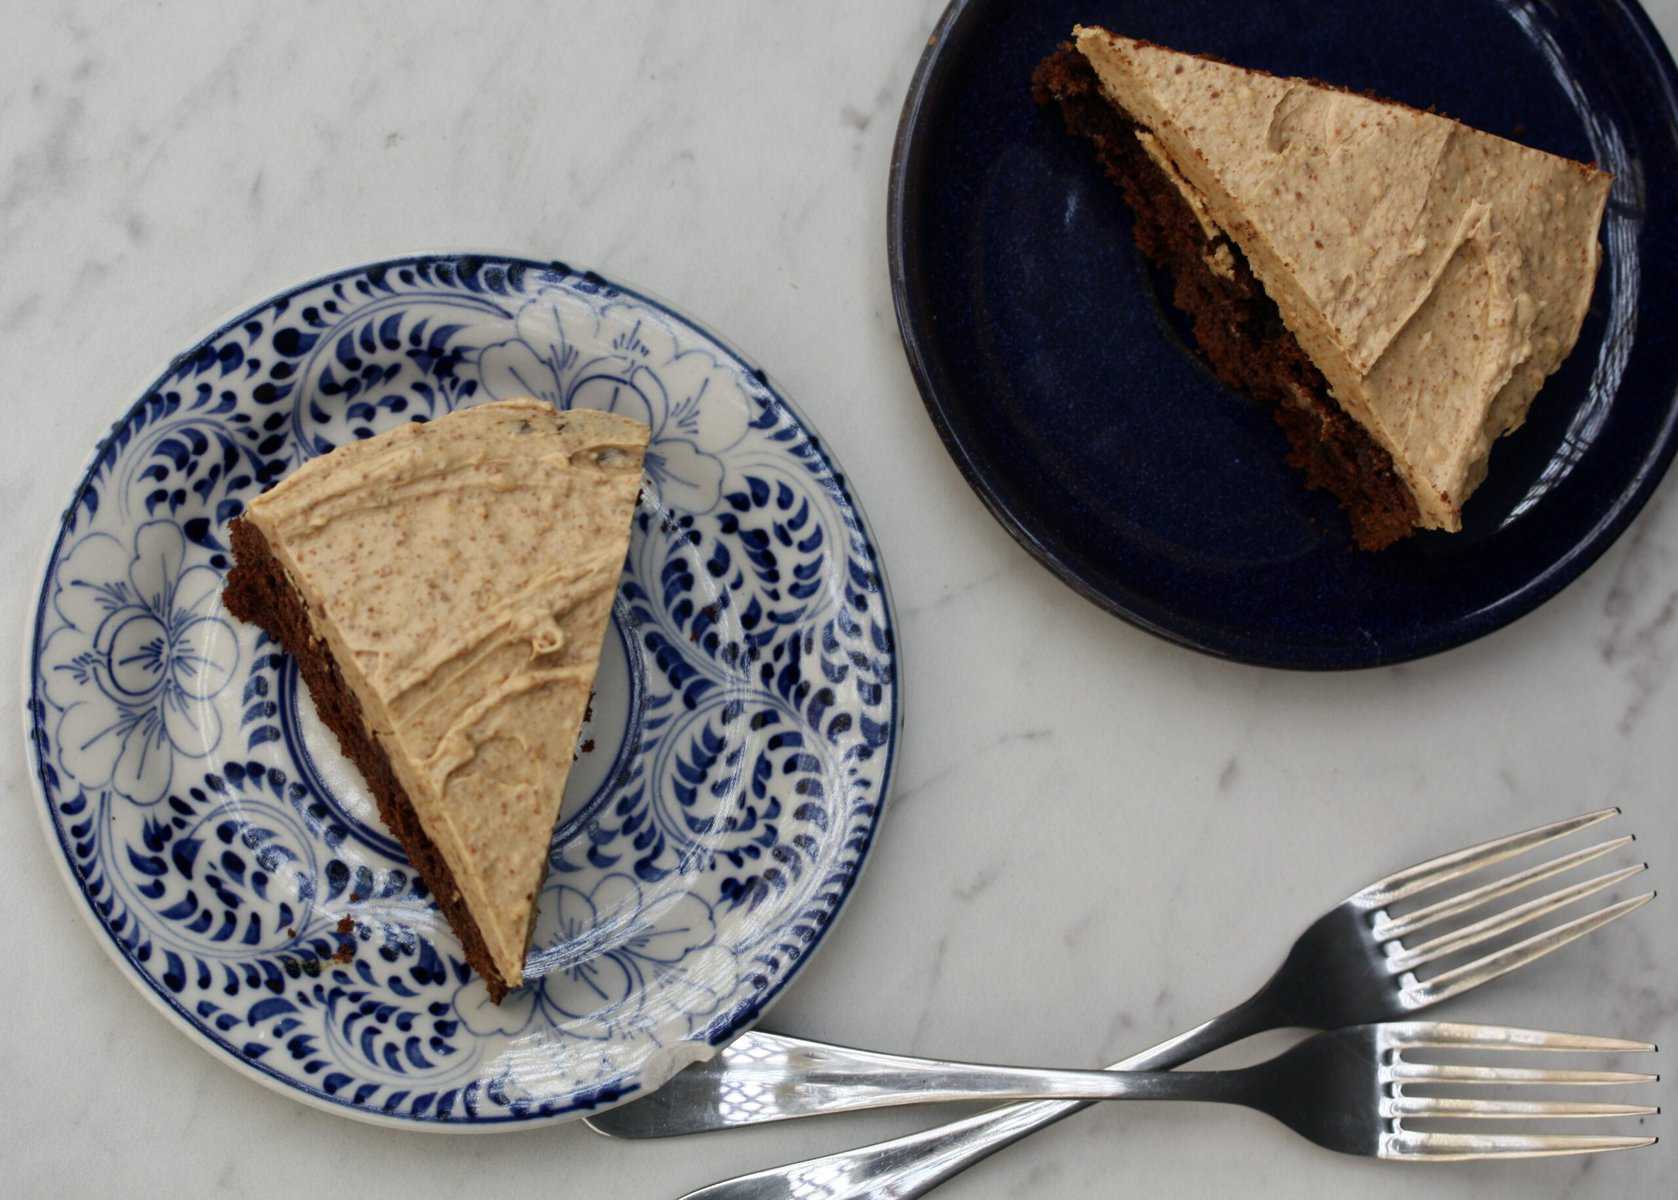 Two slices of gluten-free buttermilk chocolate cake on a white background with two forks.